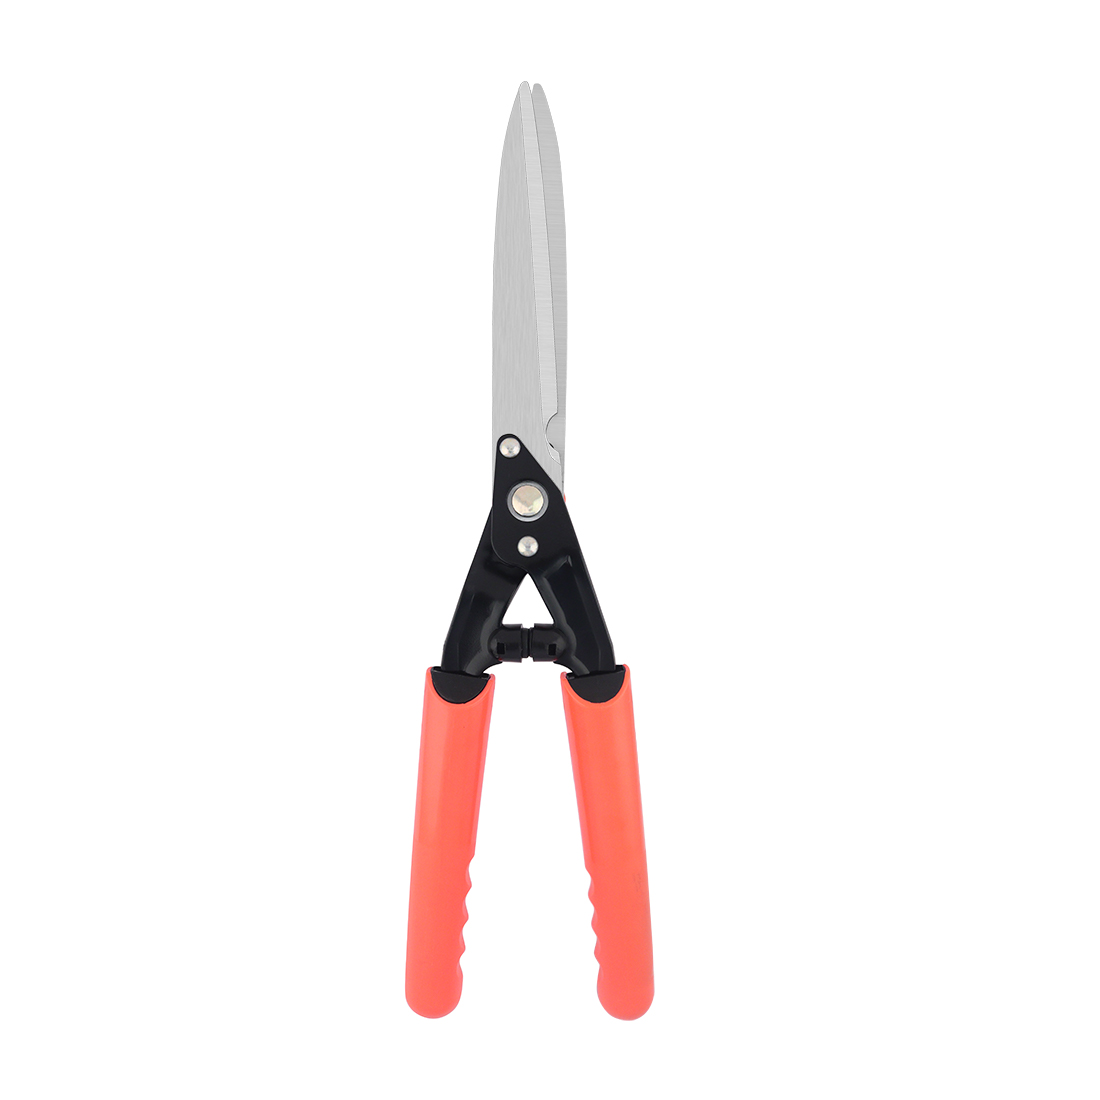 falcon-10-inch-blades-premium-hedge-shear-with-plastic-handle-fhs-999-p